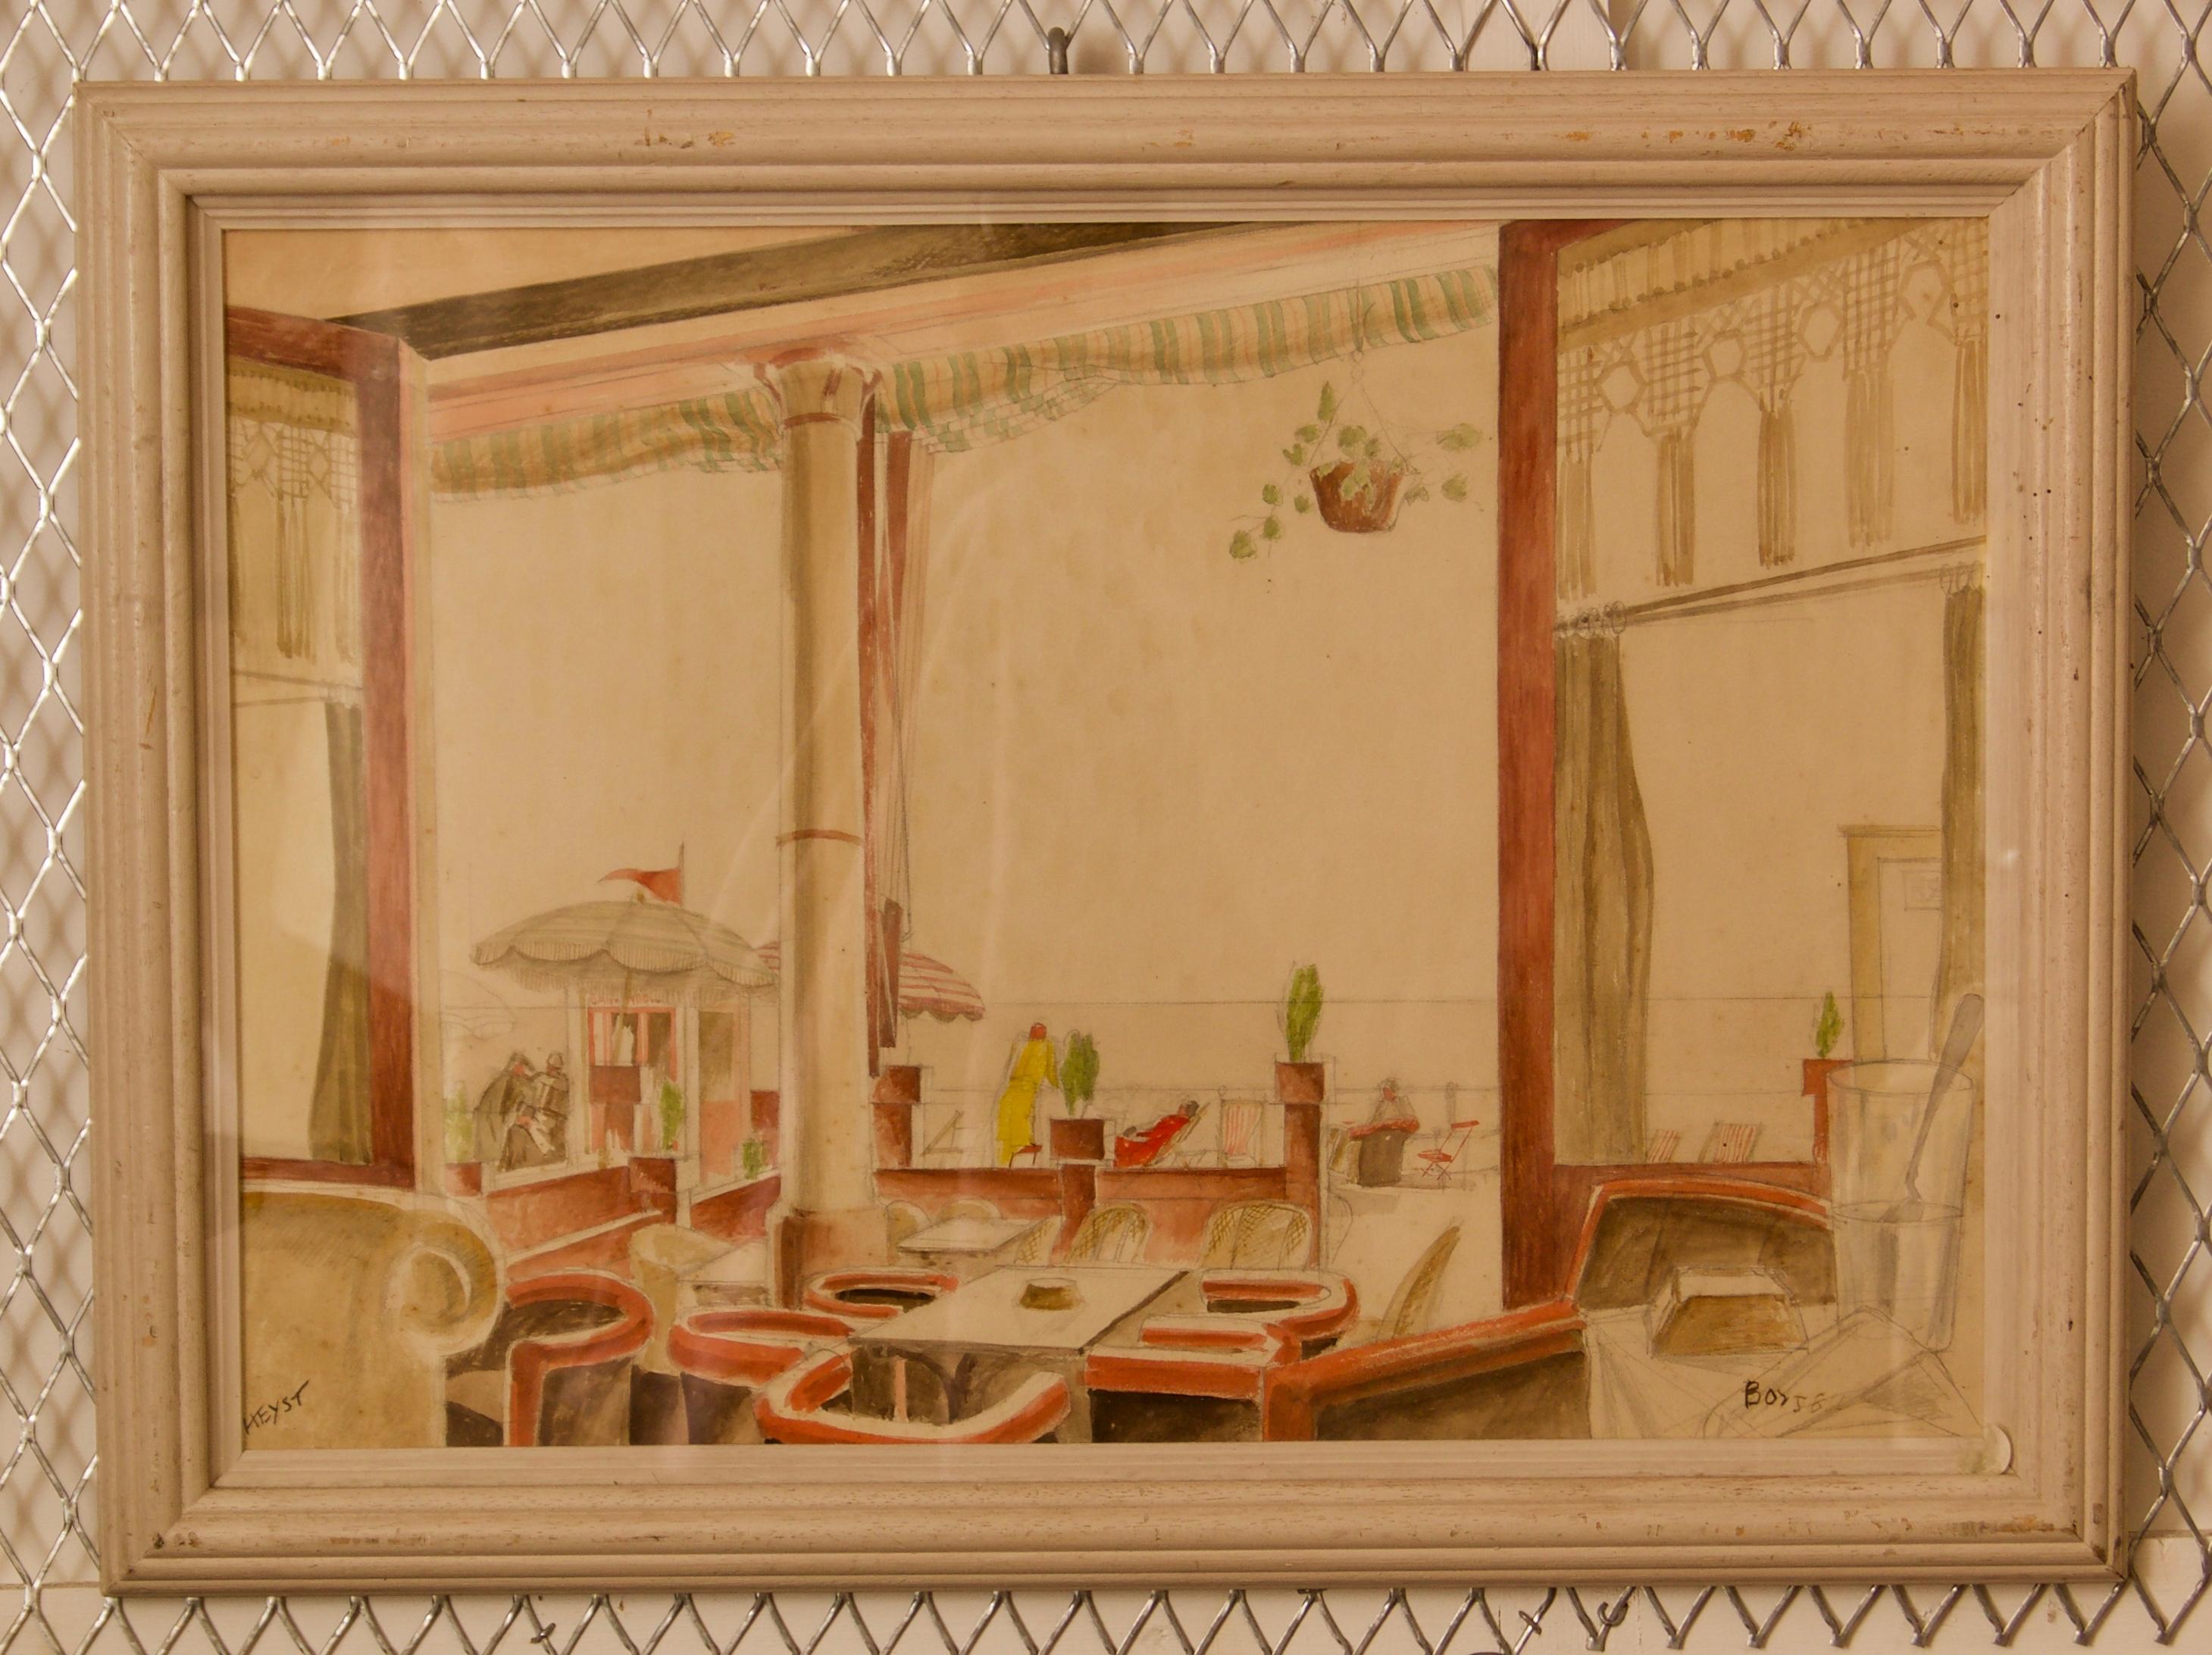 Howard Bowen is a Postwar & Contemporary artist.

This piece was created using watercolour and is in a wooden frame under glass.

Keywords: Art deco, interior, watercolor, landscape, buildings, 1950s, 1958, restaurant, cafe, chairs, table, dinning,